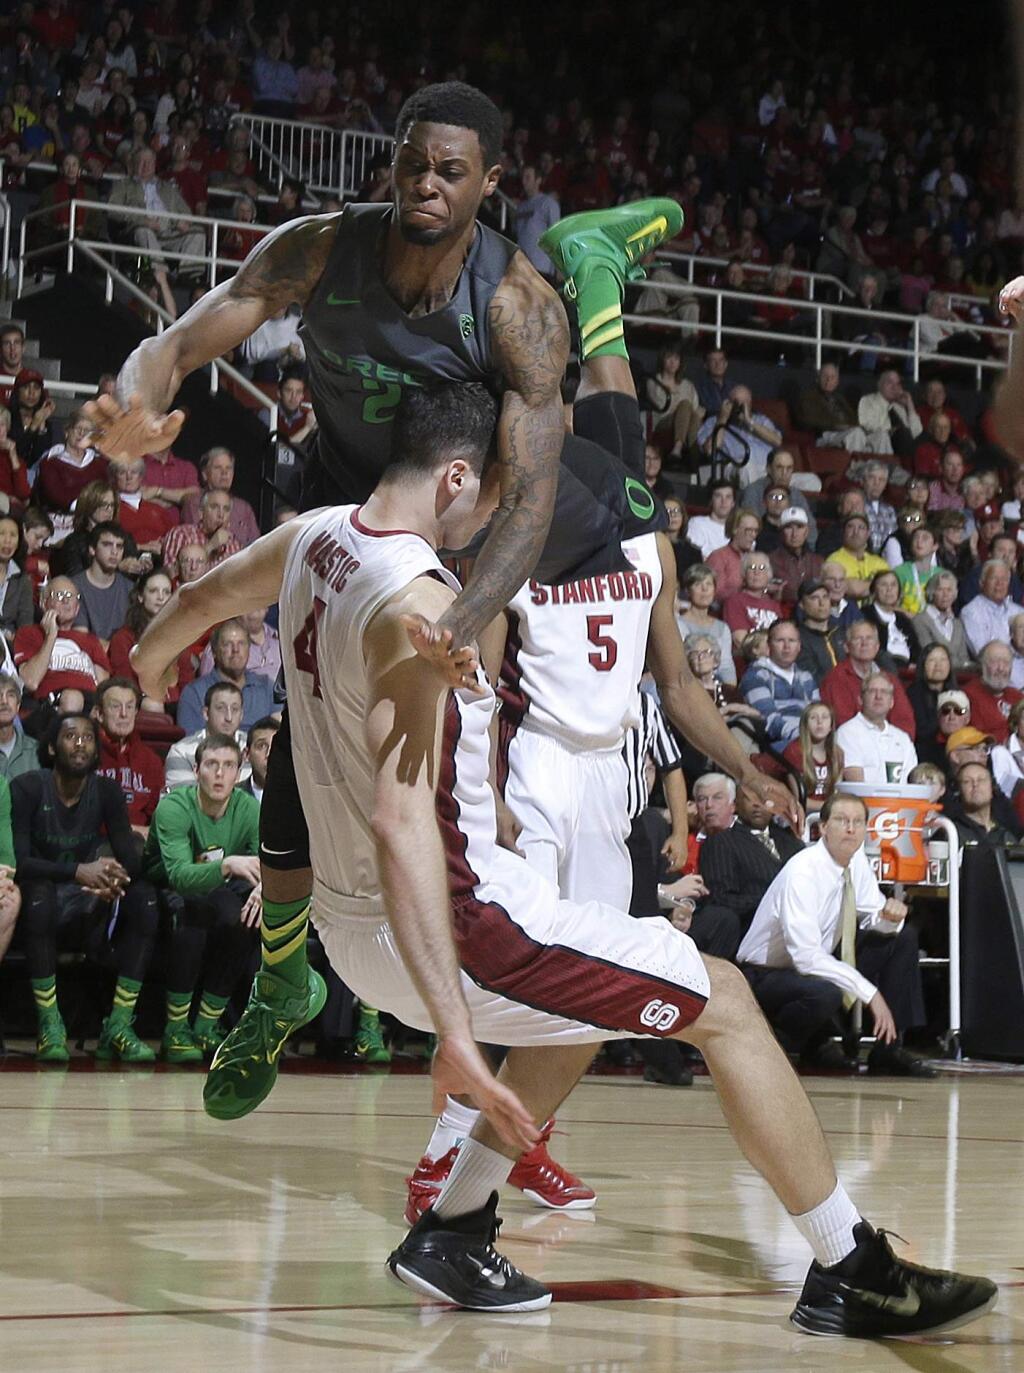 Oregon's Elgin Cook, top, knocks over Stanford's Stefan Nastic (4) during the second half of an NCAA college basketball game in Stanford, Calif., Sunday, March 1, 2015. Oregon won 73-70. (AP Photo/Jeff Chiu)